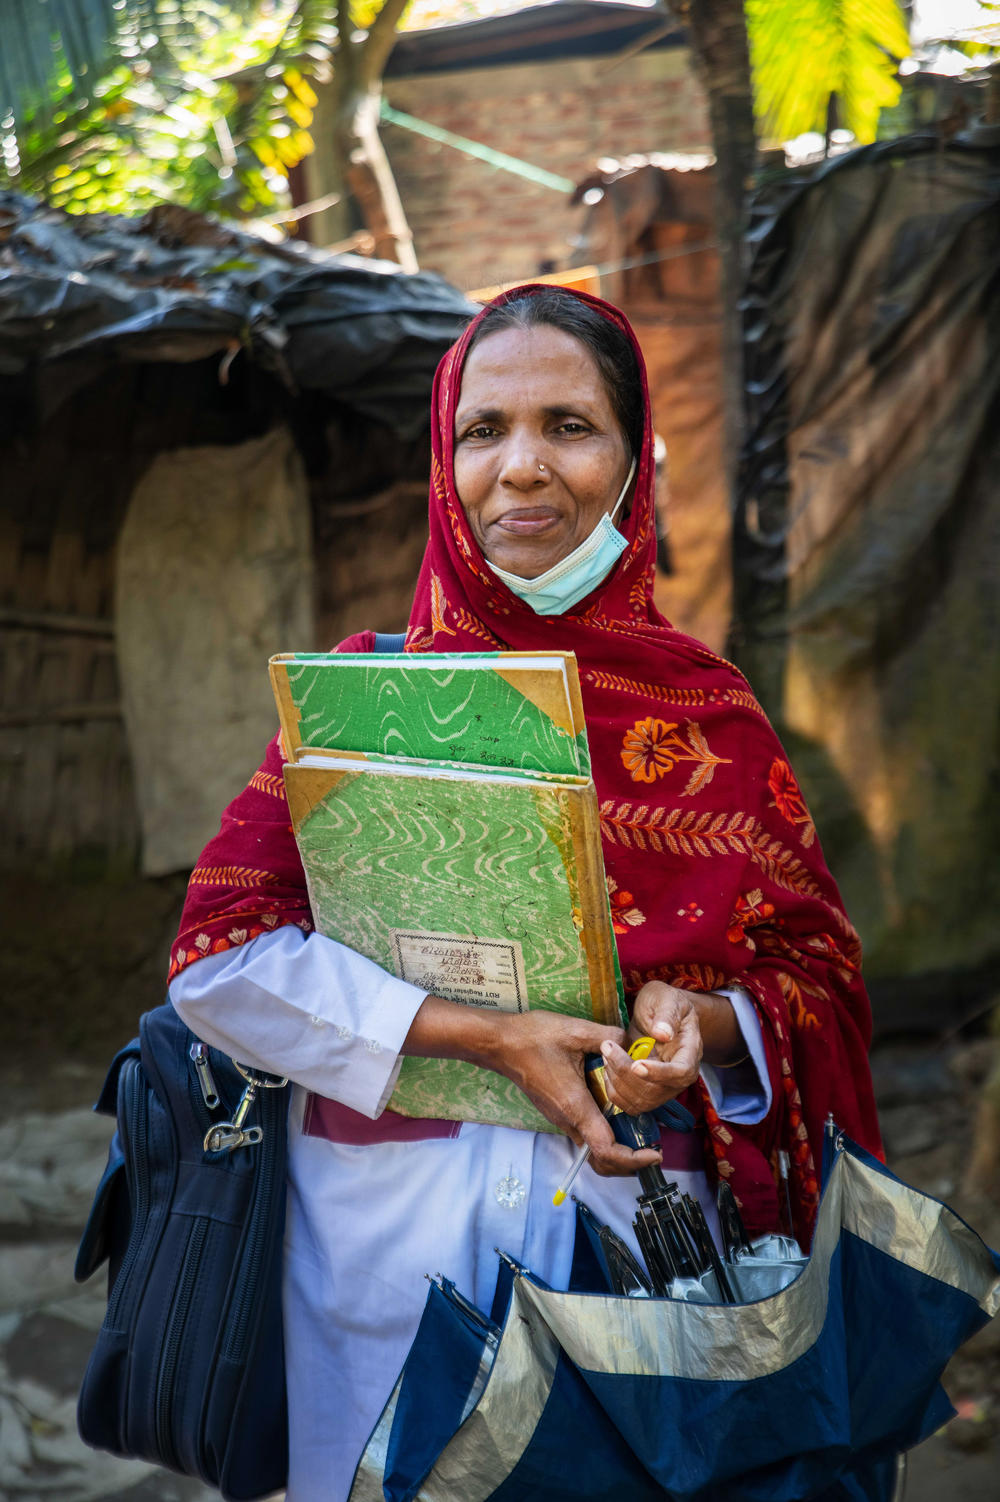 Bulbul Aktar, a health worker, will make daily calls to a patient with malaria to see how they're doing.